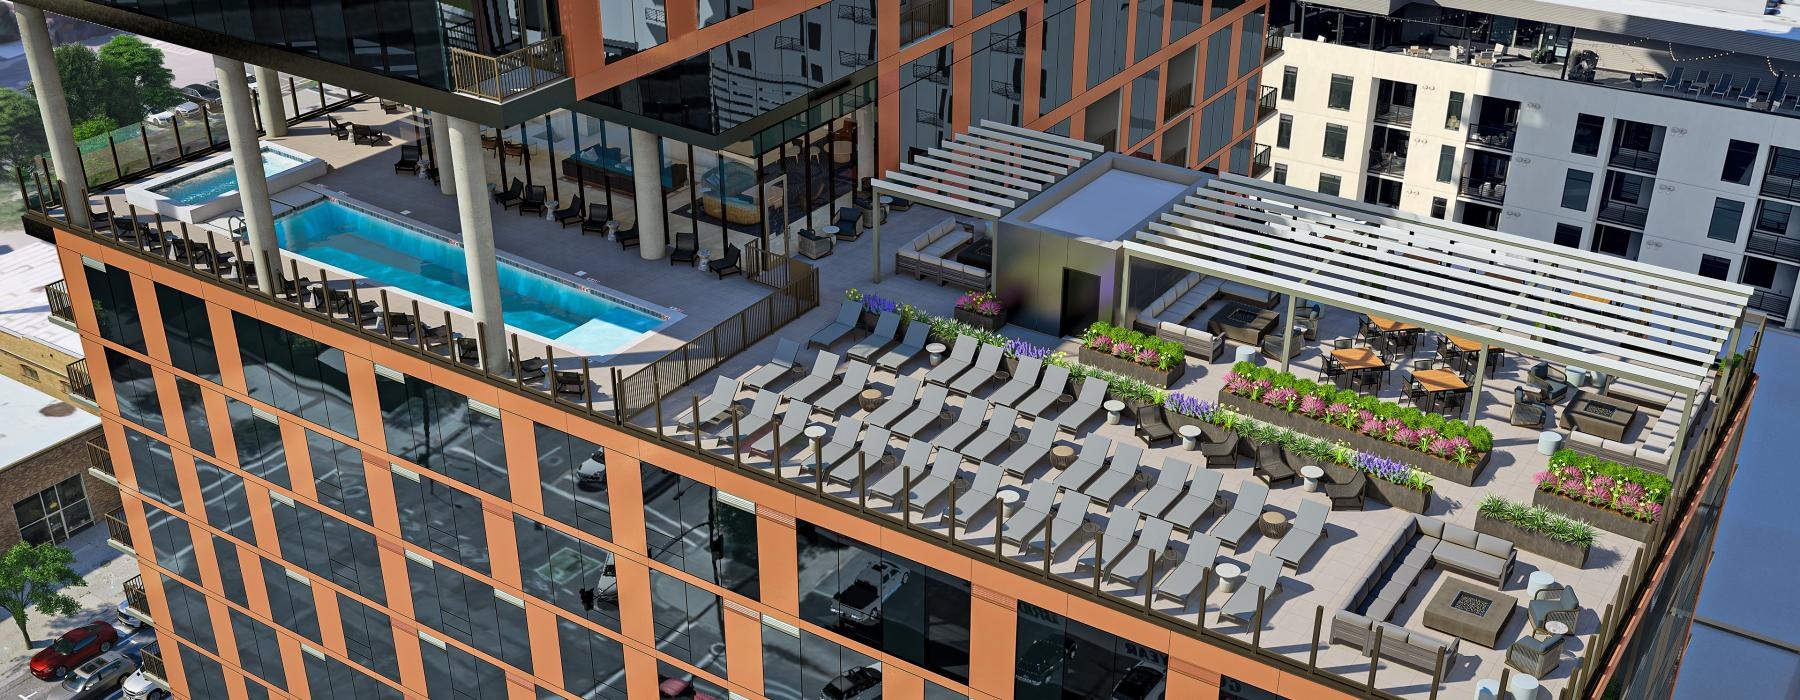 rooftop swimming pool and lounge